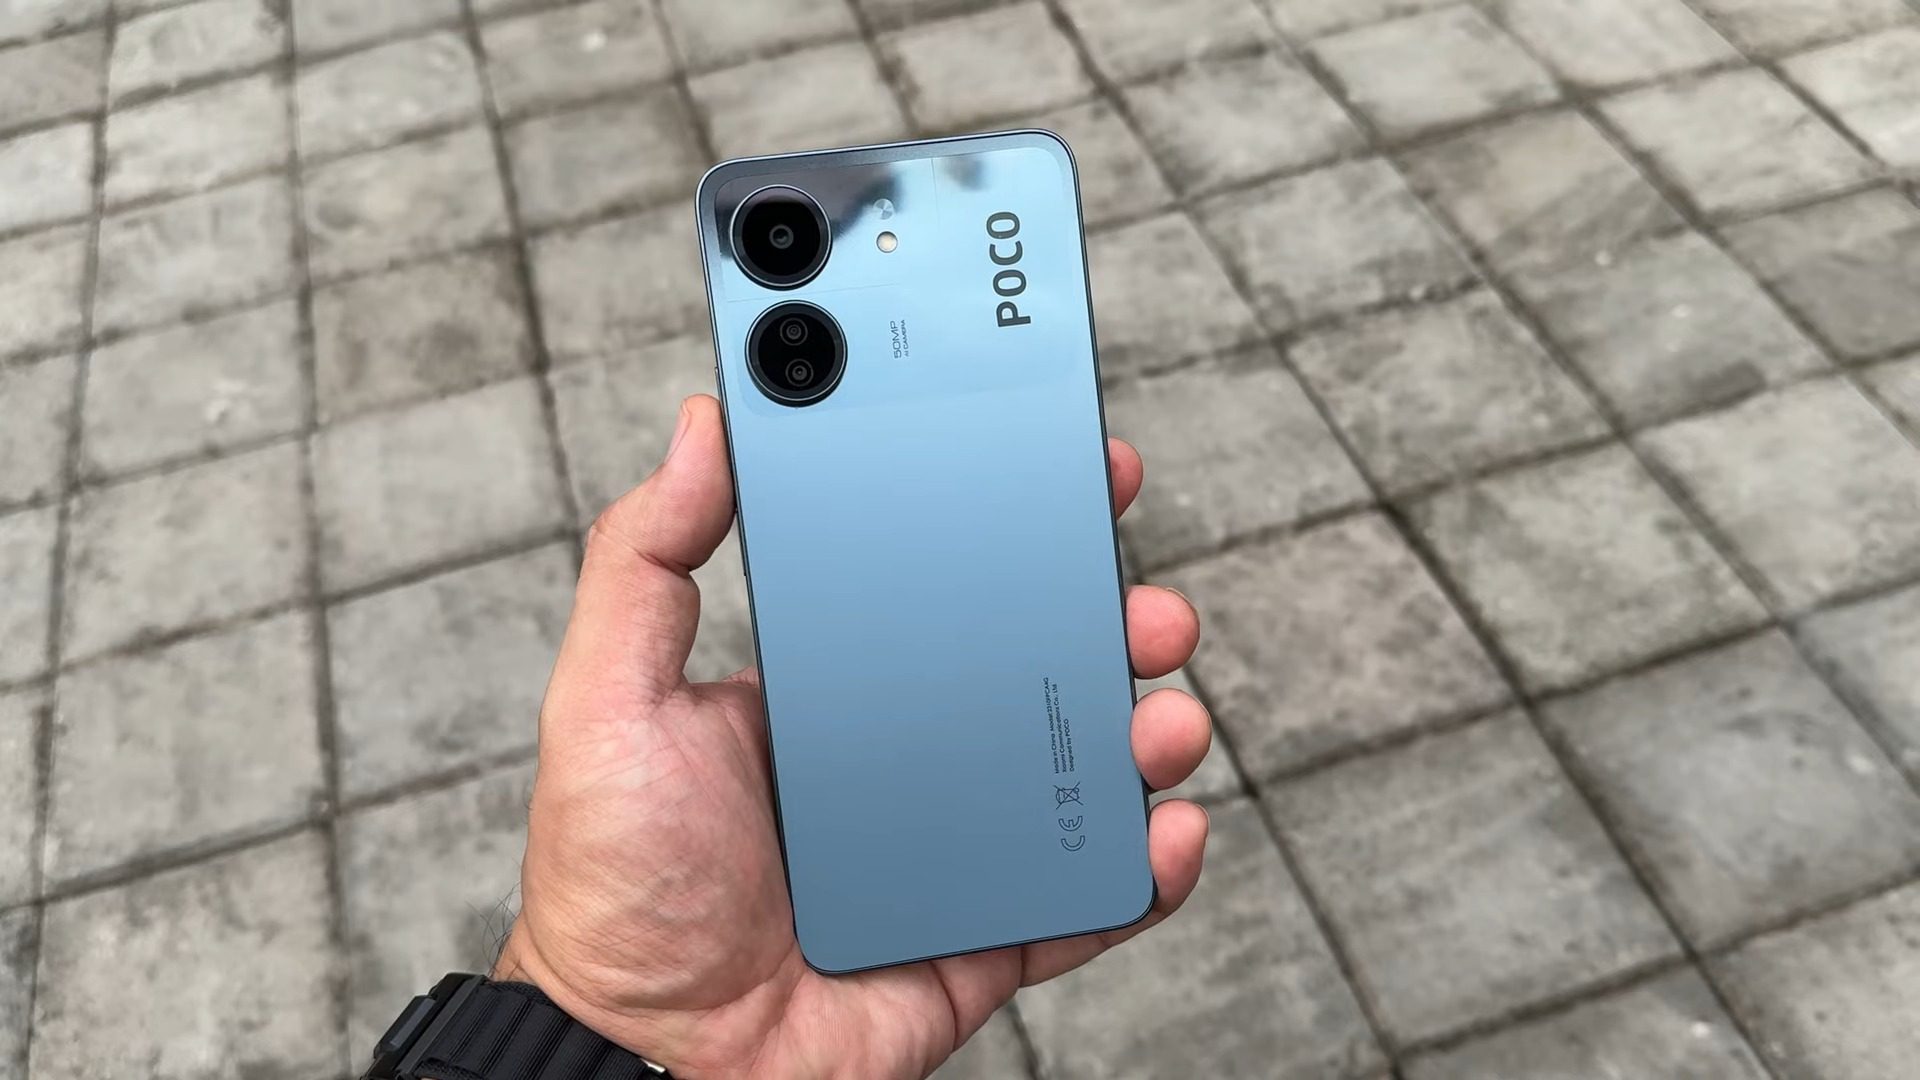 Poco C65 in for review -  news